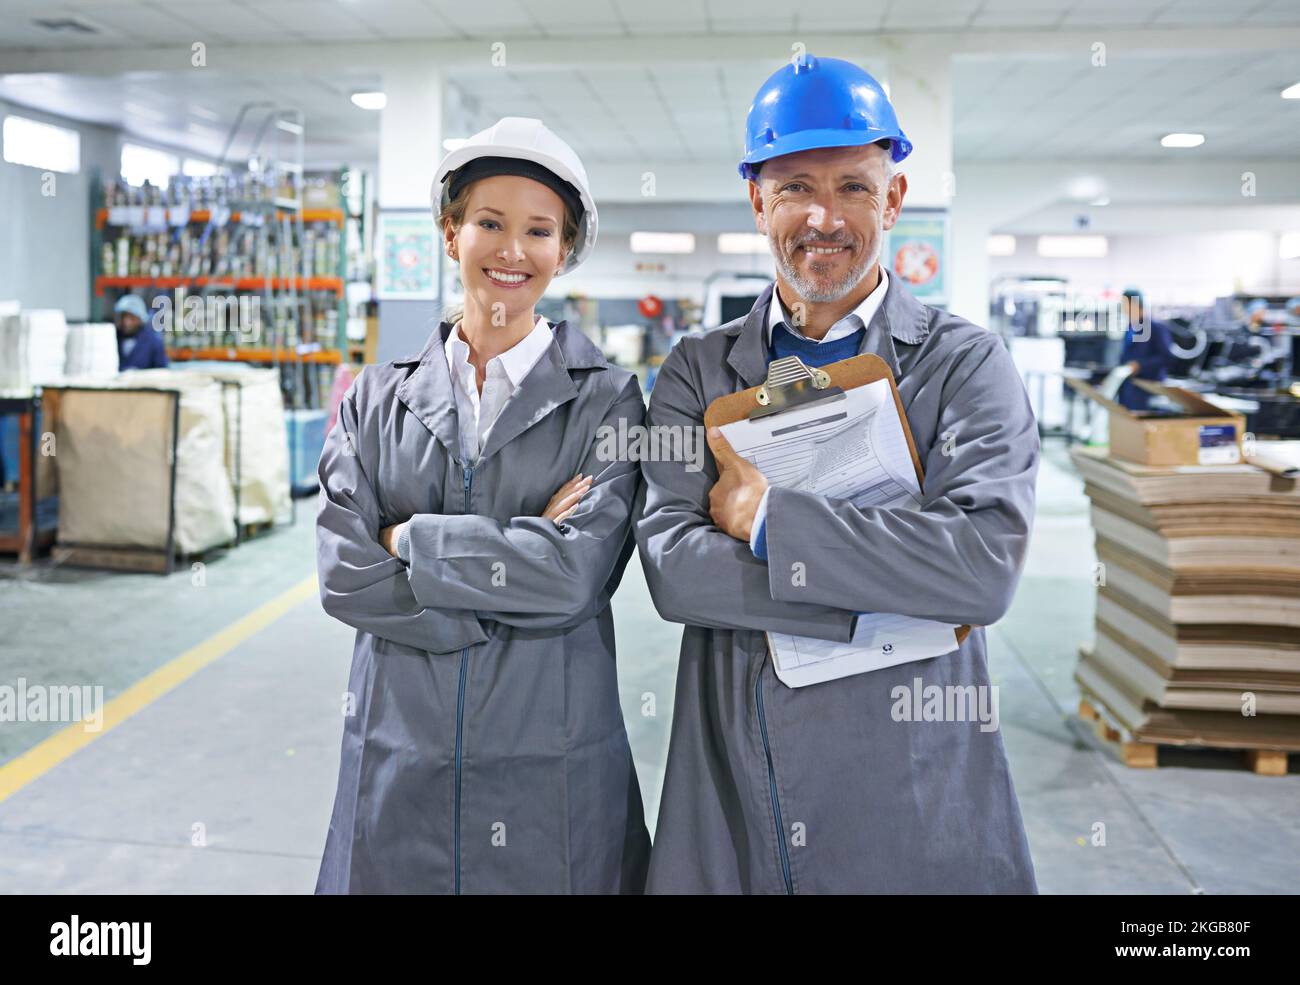 Our business is a well-oiled machine. a people working inside a printing, packaging and distribution factory. Stock Photo